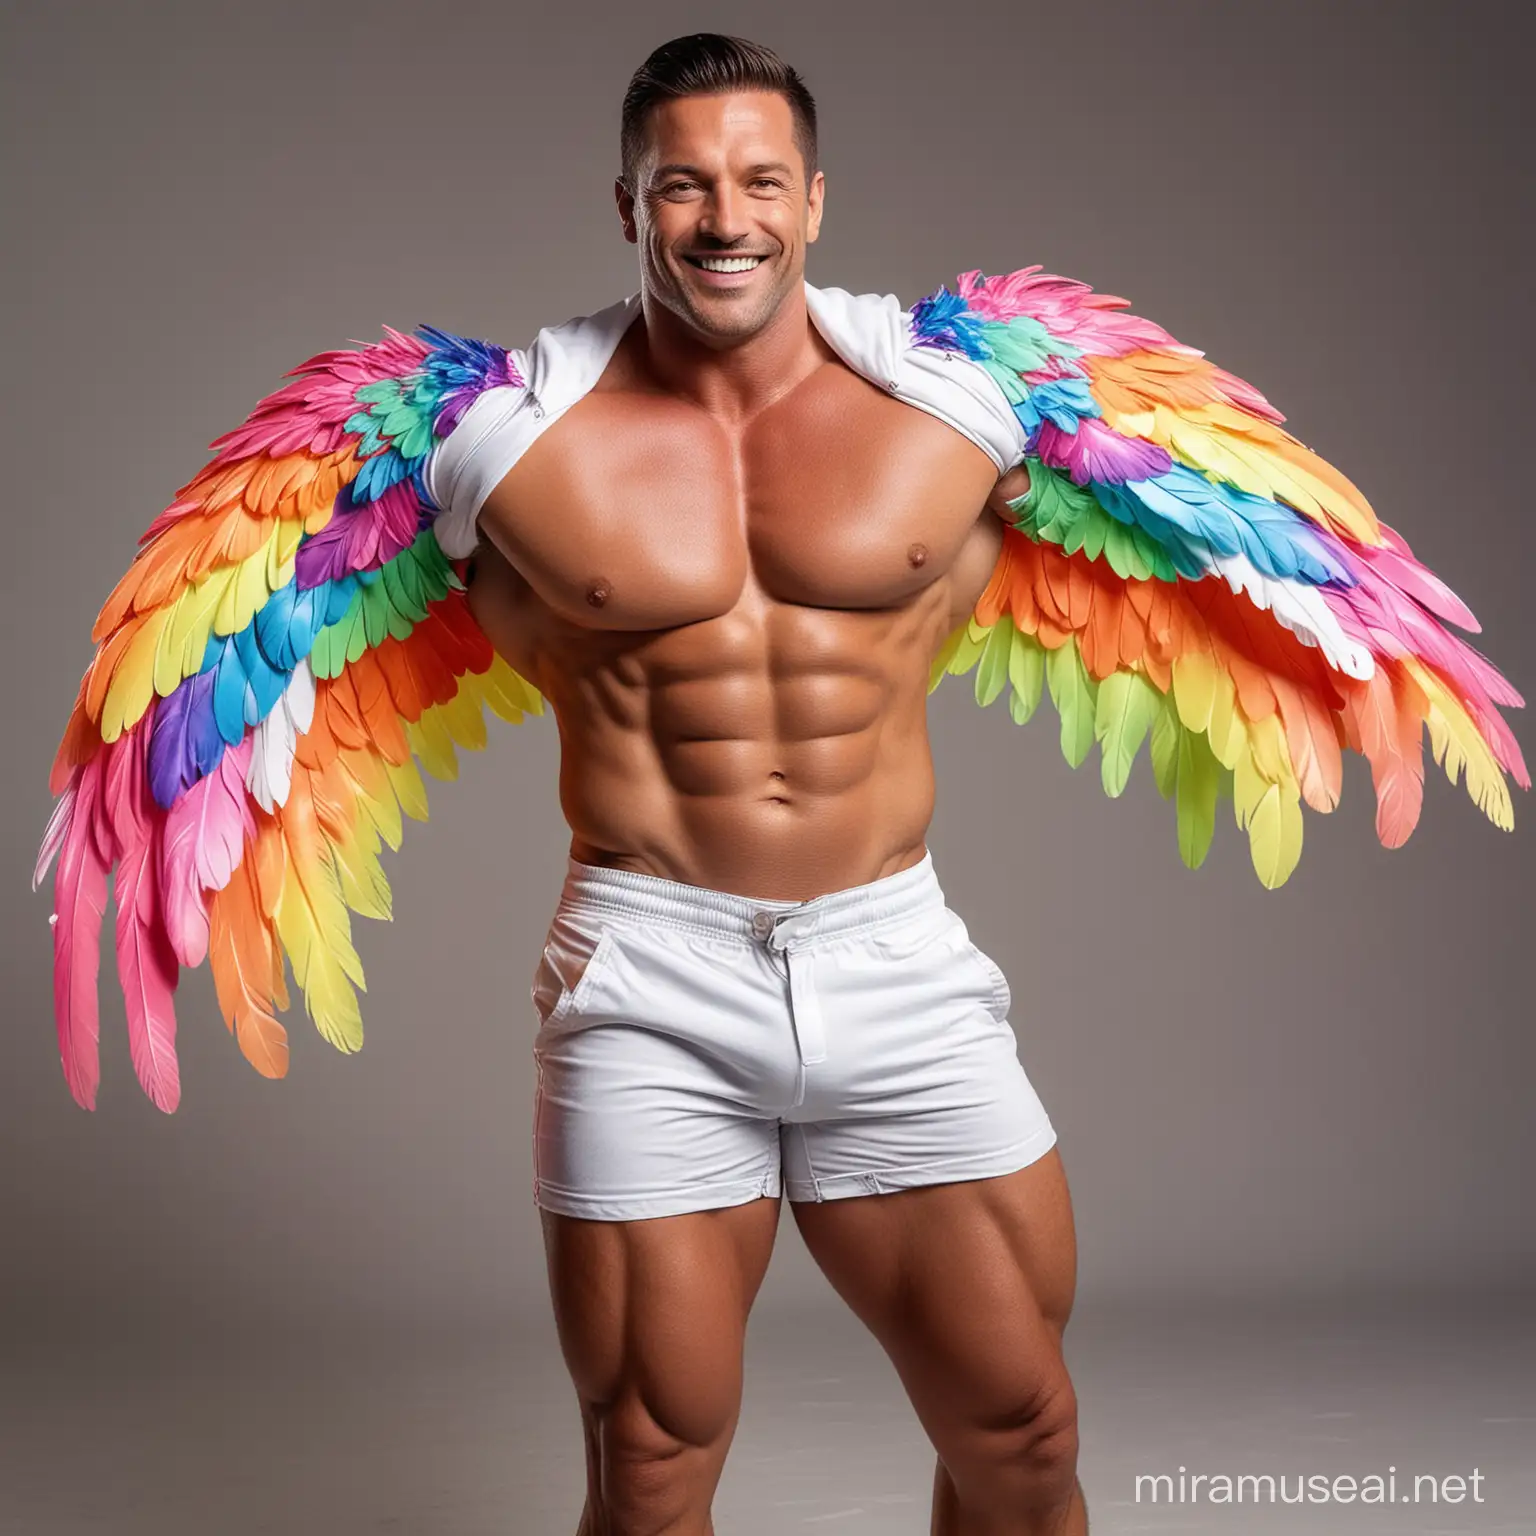 Full Body to feet Topless 30s Ultra Chunky IFBB Bodybuilder Daddy with Great Smiles wearing Multi-Highlighter Bright Rainbow Coloured with white See Through Eagle Wings Shoulder Jacket Short shorts Flexing his Big Strong Arm